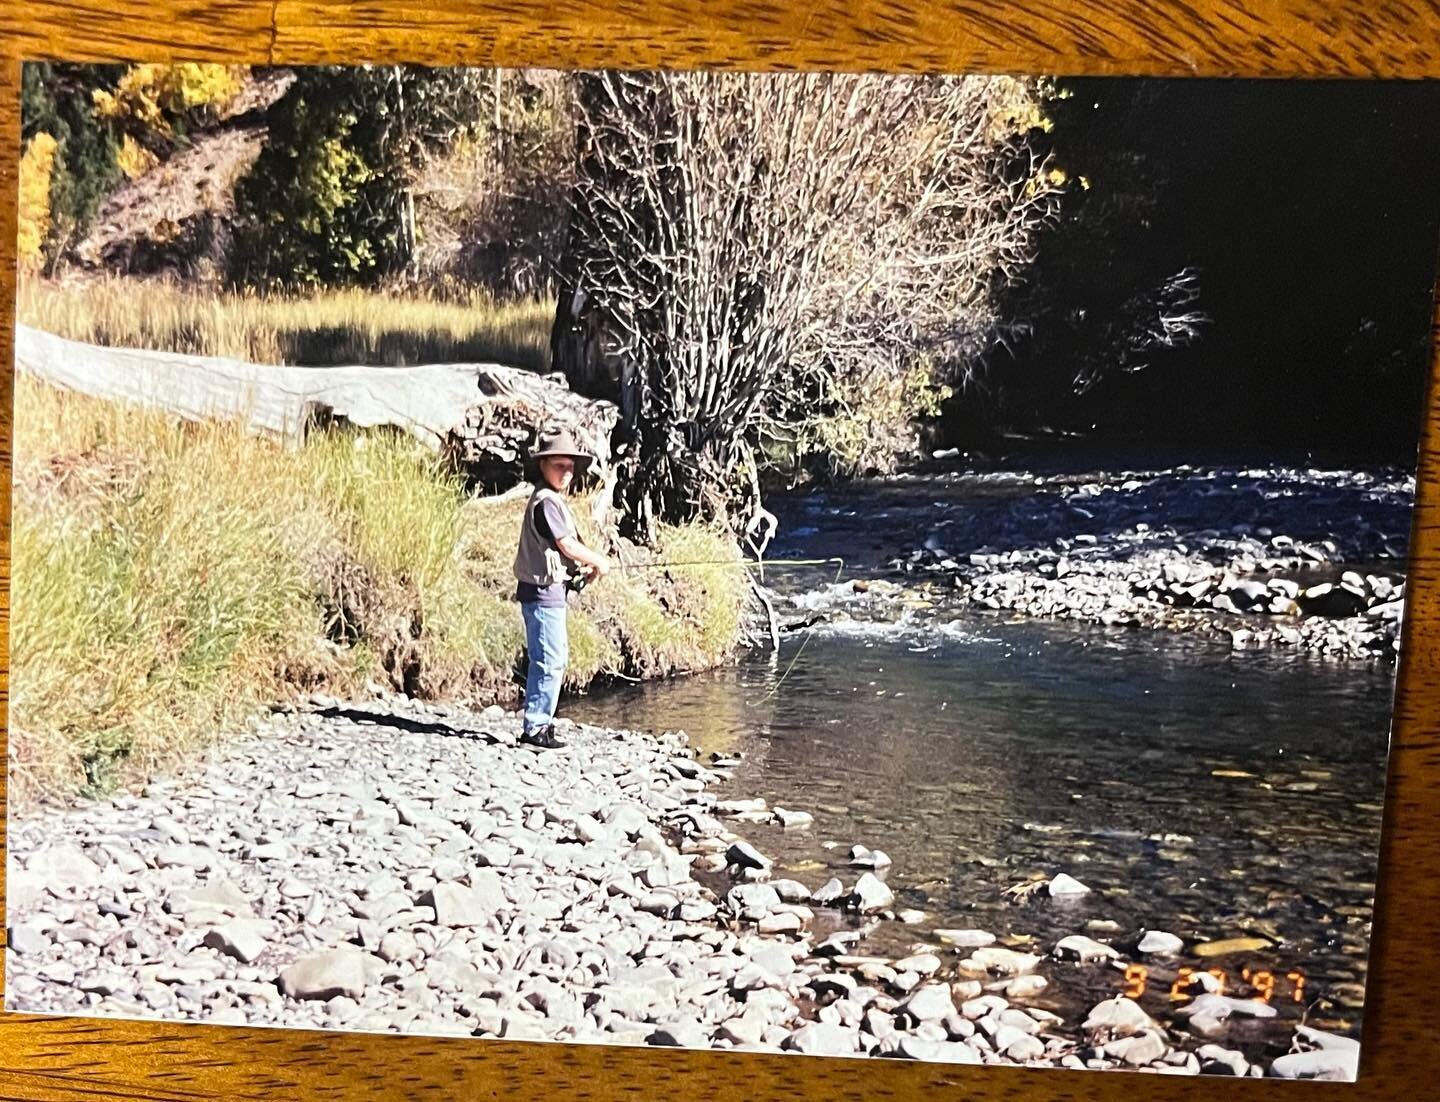 Found some old photos from my early days.
- Sun Valley 97
- Opening day Yellowstone River 99(my first big cutthroat)
- Logjam 01